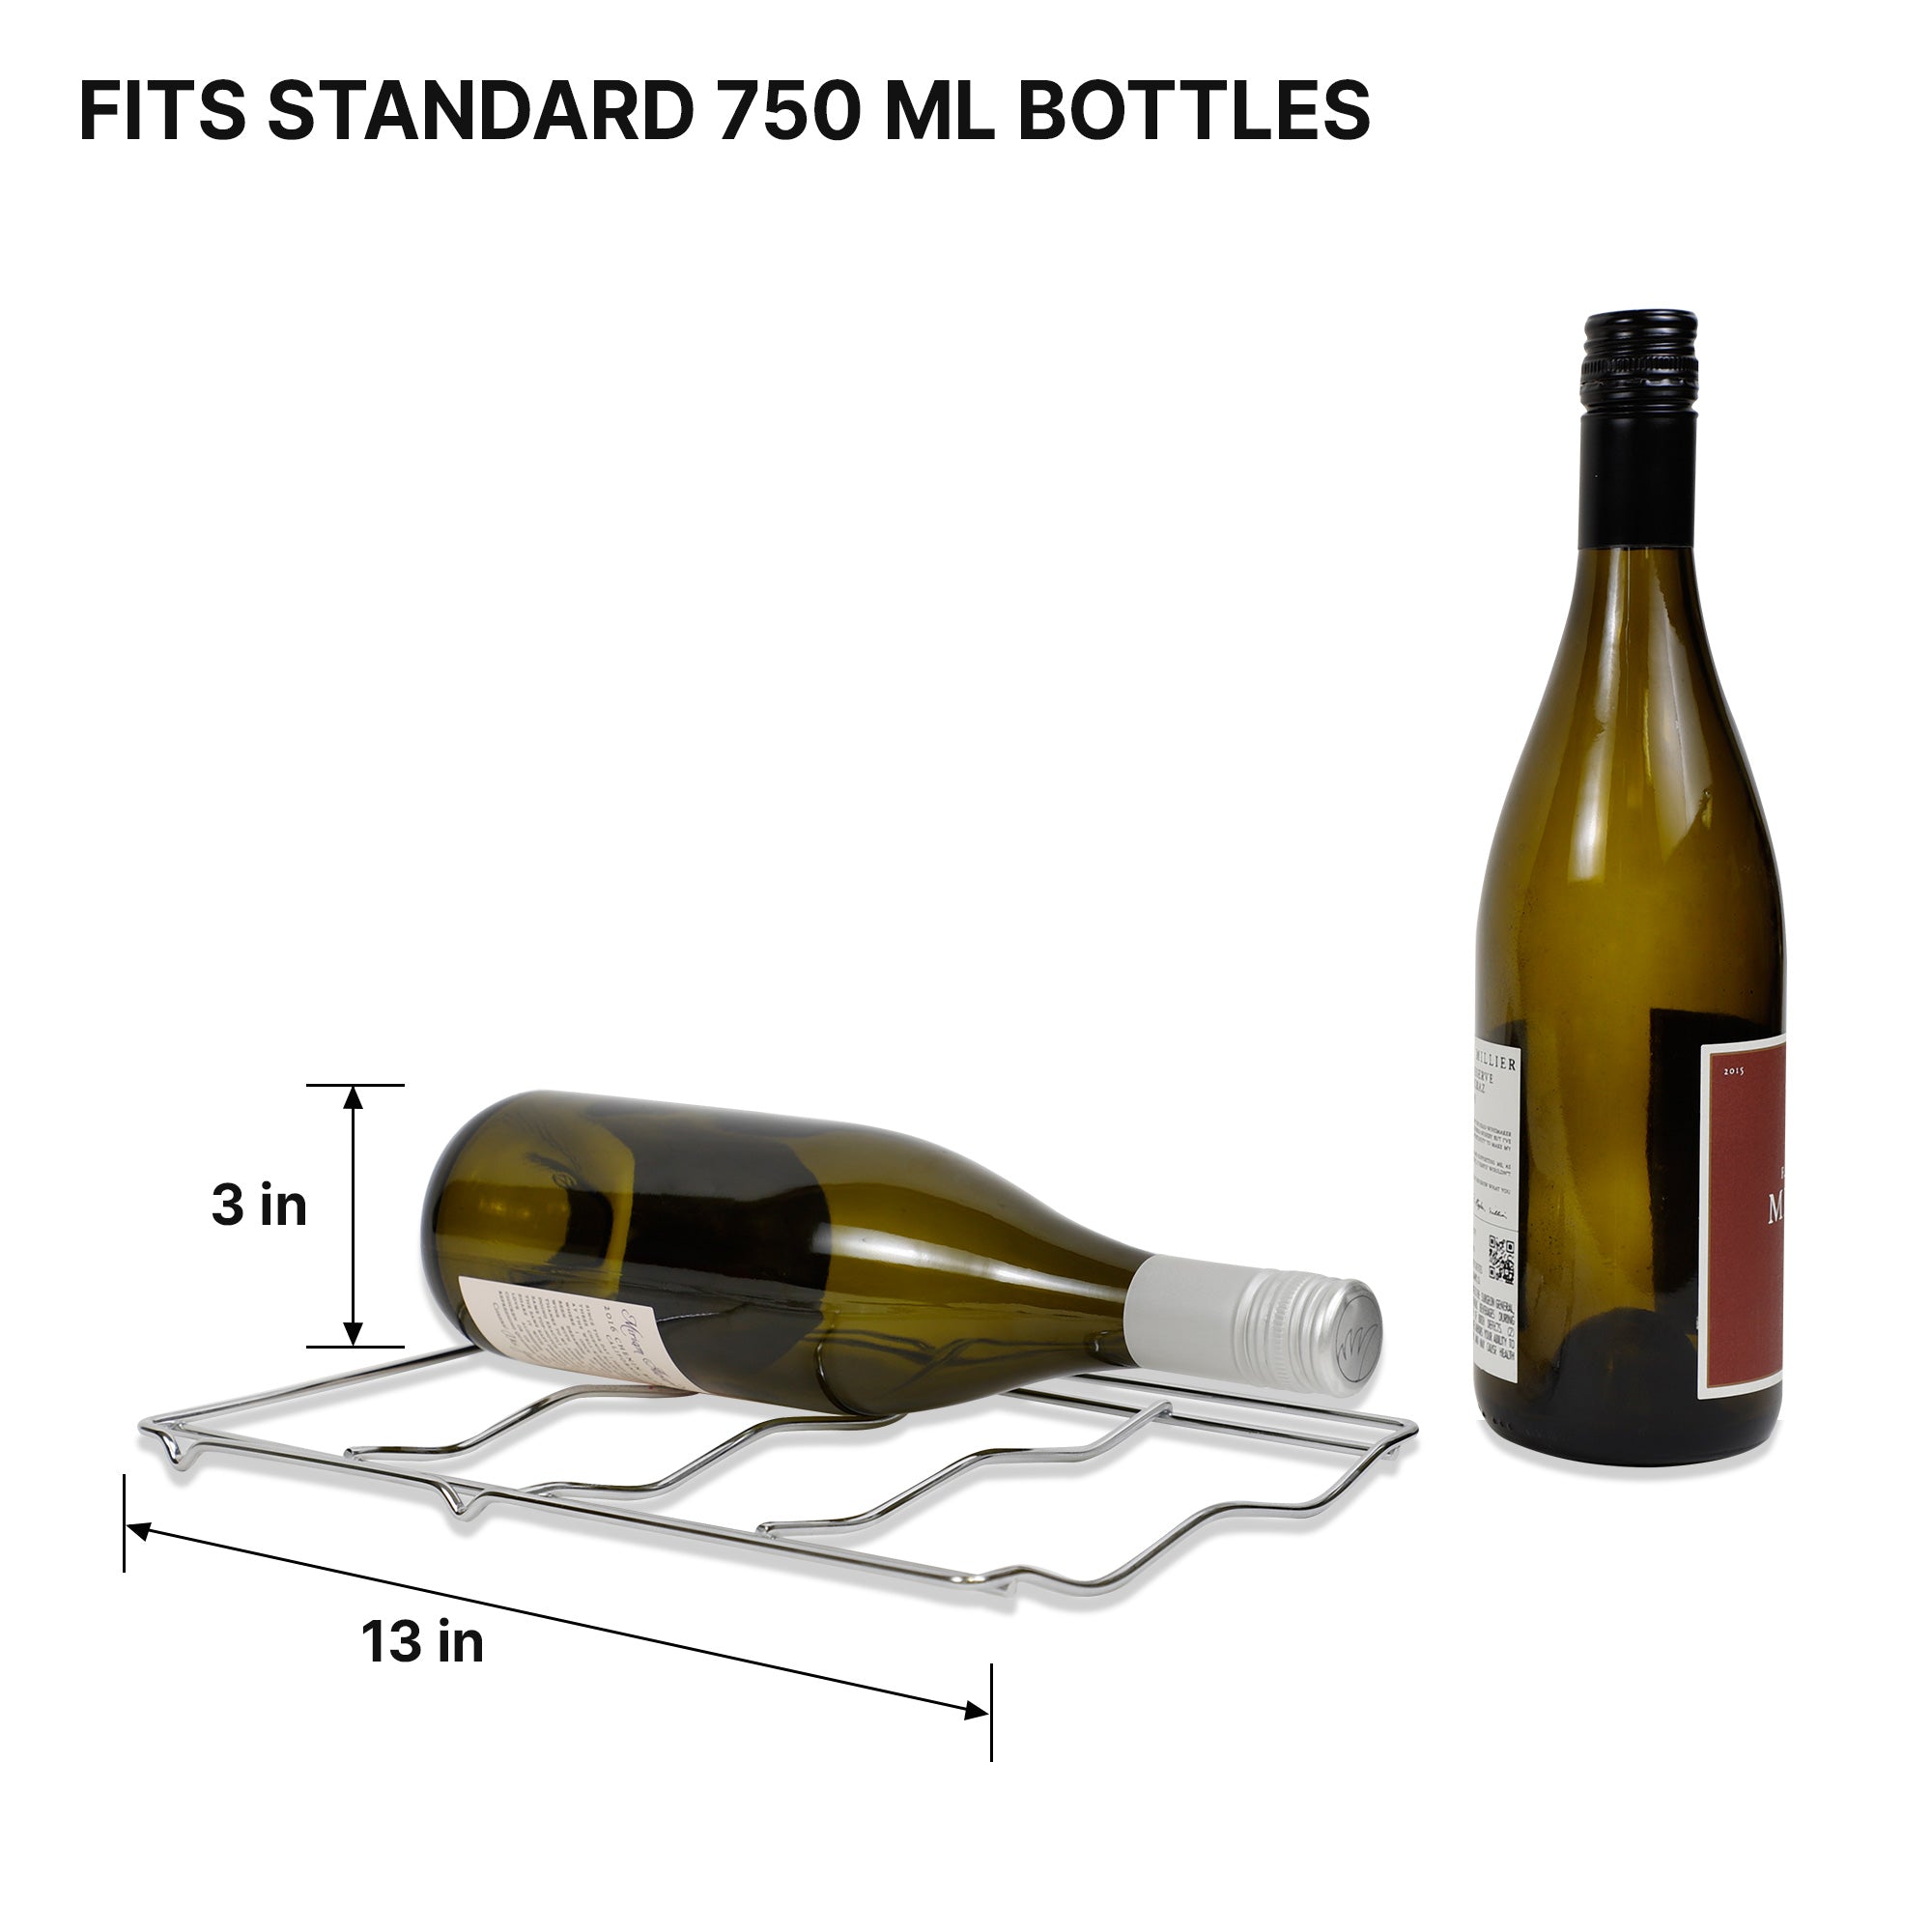 Removable wire rack from Koolatron 12 bottle wine chiller with dimensions listed and one wine bottle lying on it and one standing up beside it. Text above reads "Fits standard 750 mL bottles"